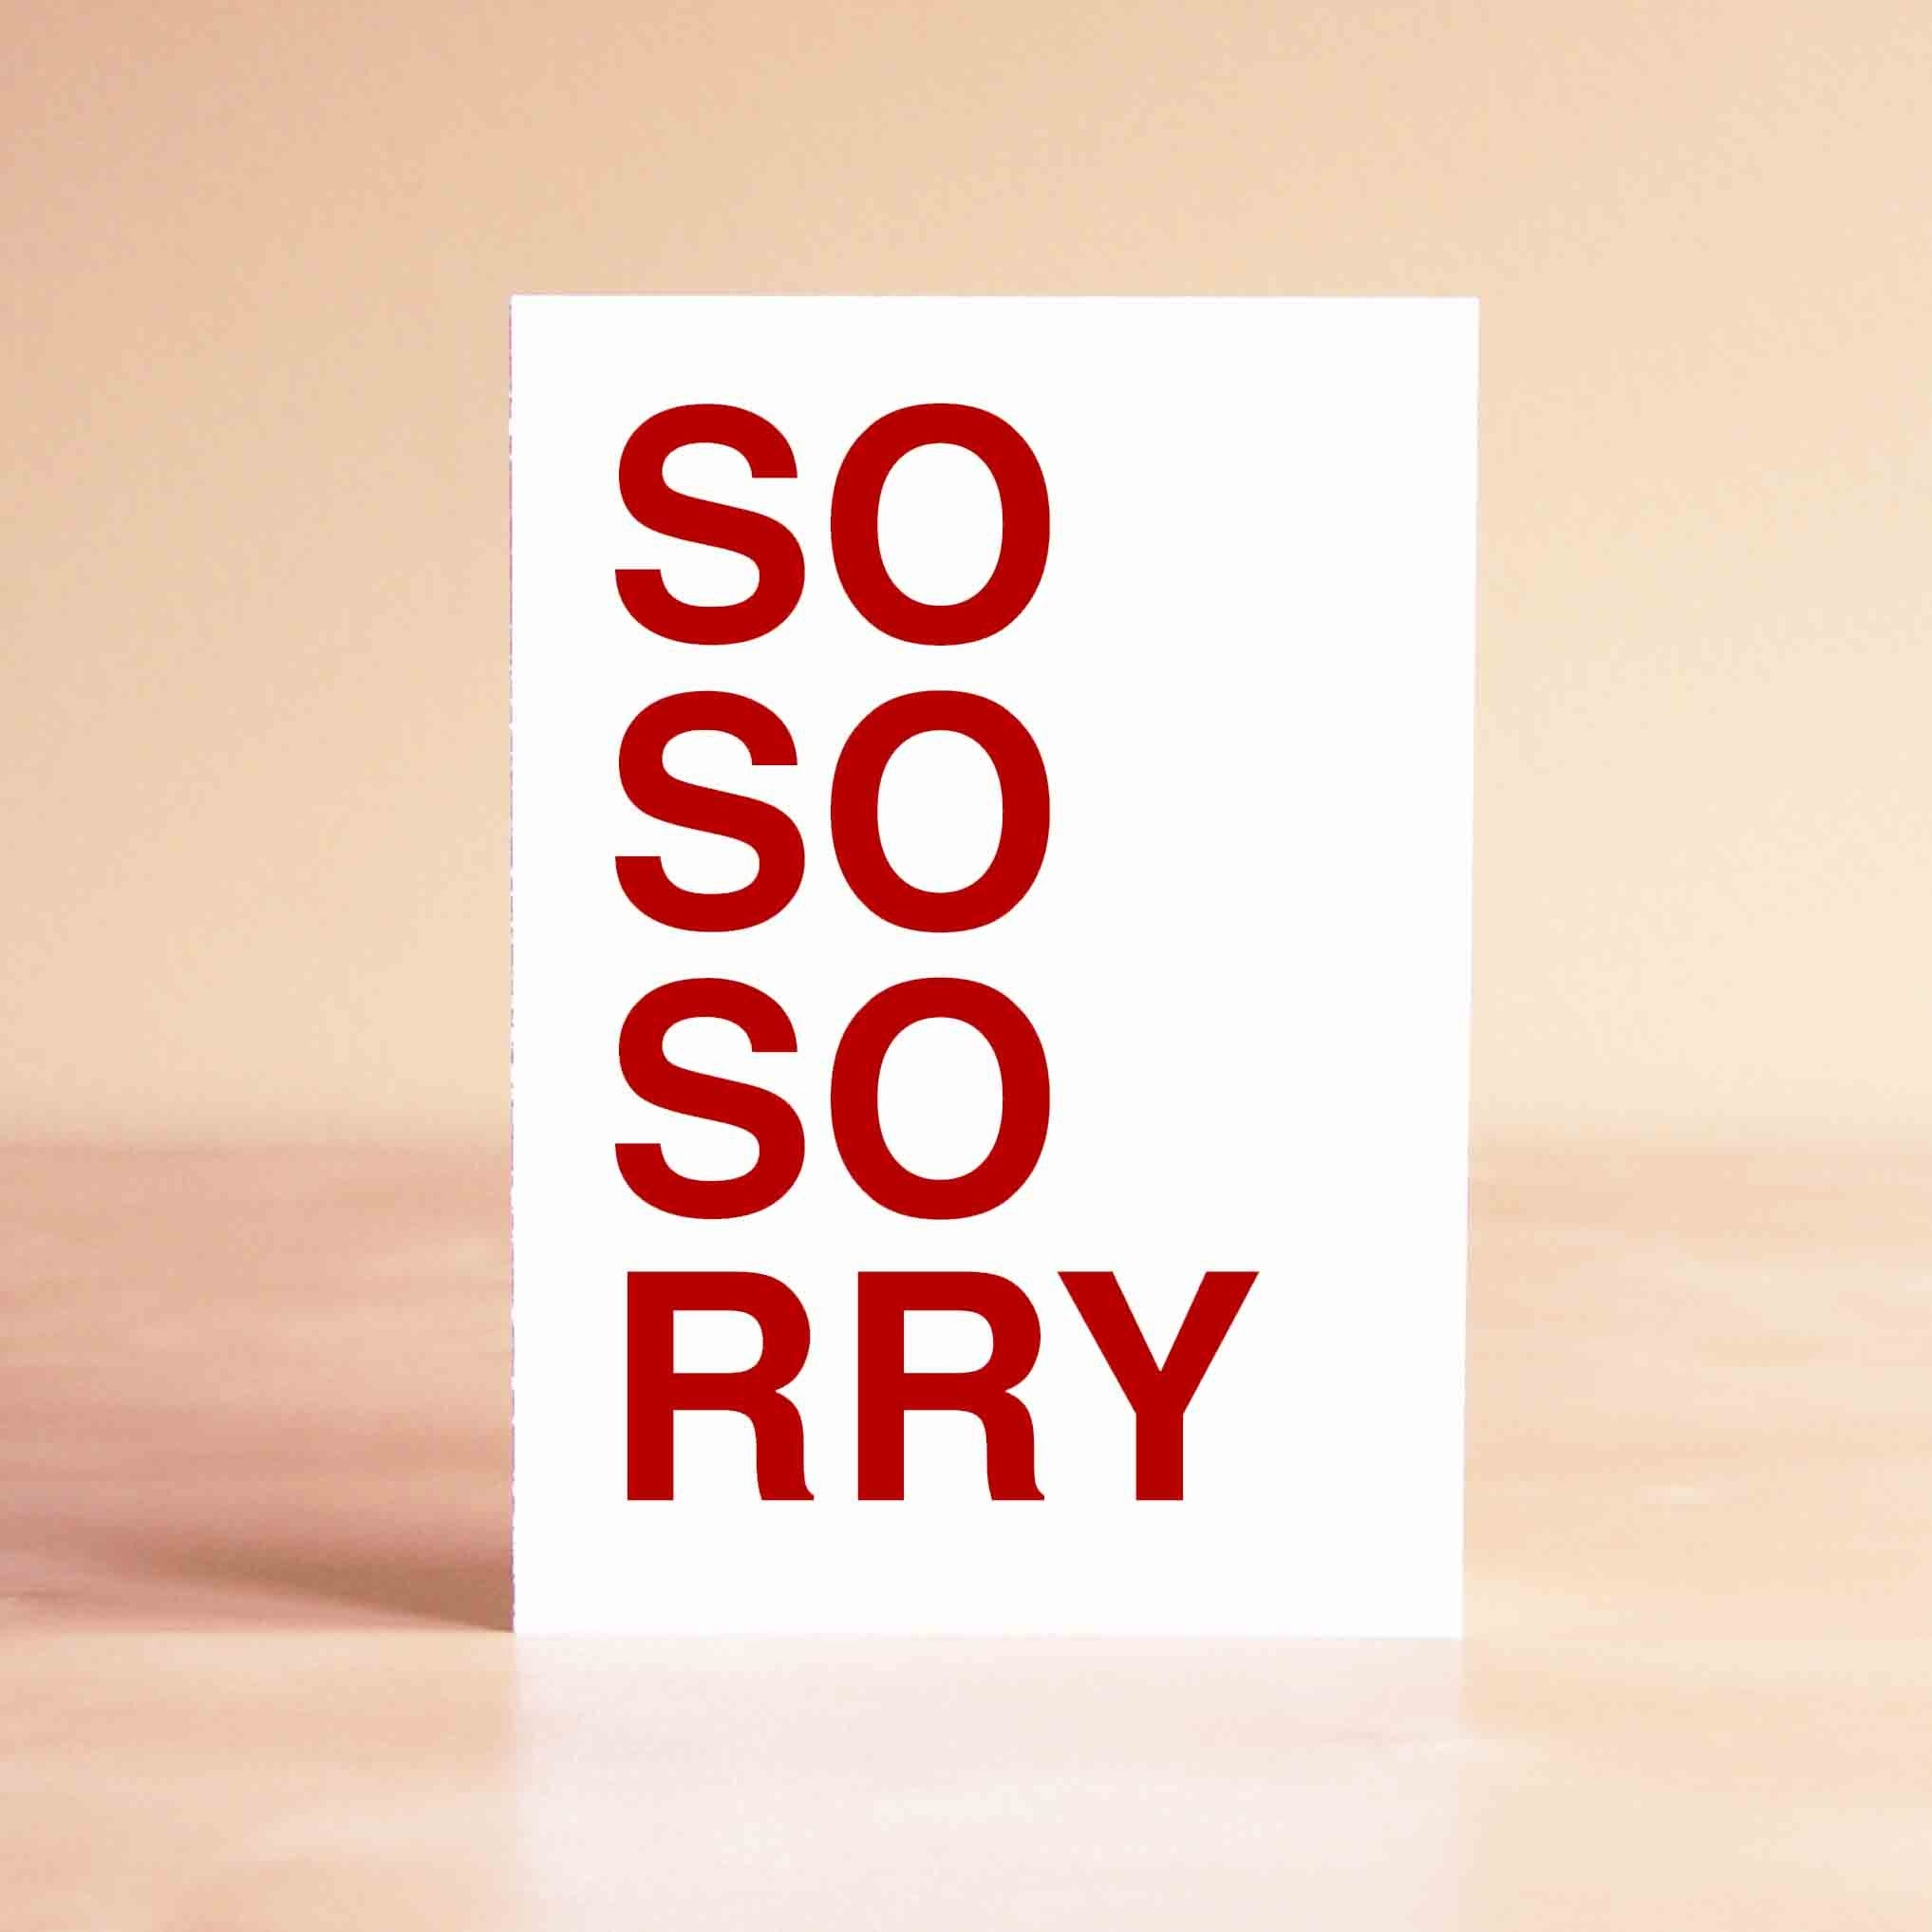 New Sorry Cards For Friends Printable | Downloadtarget Free Apology - Free Printable Apology Cards